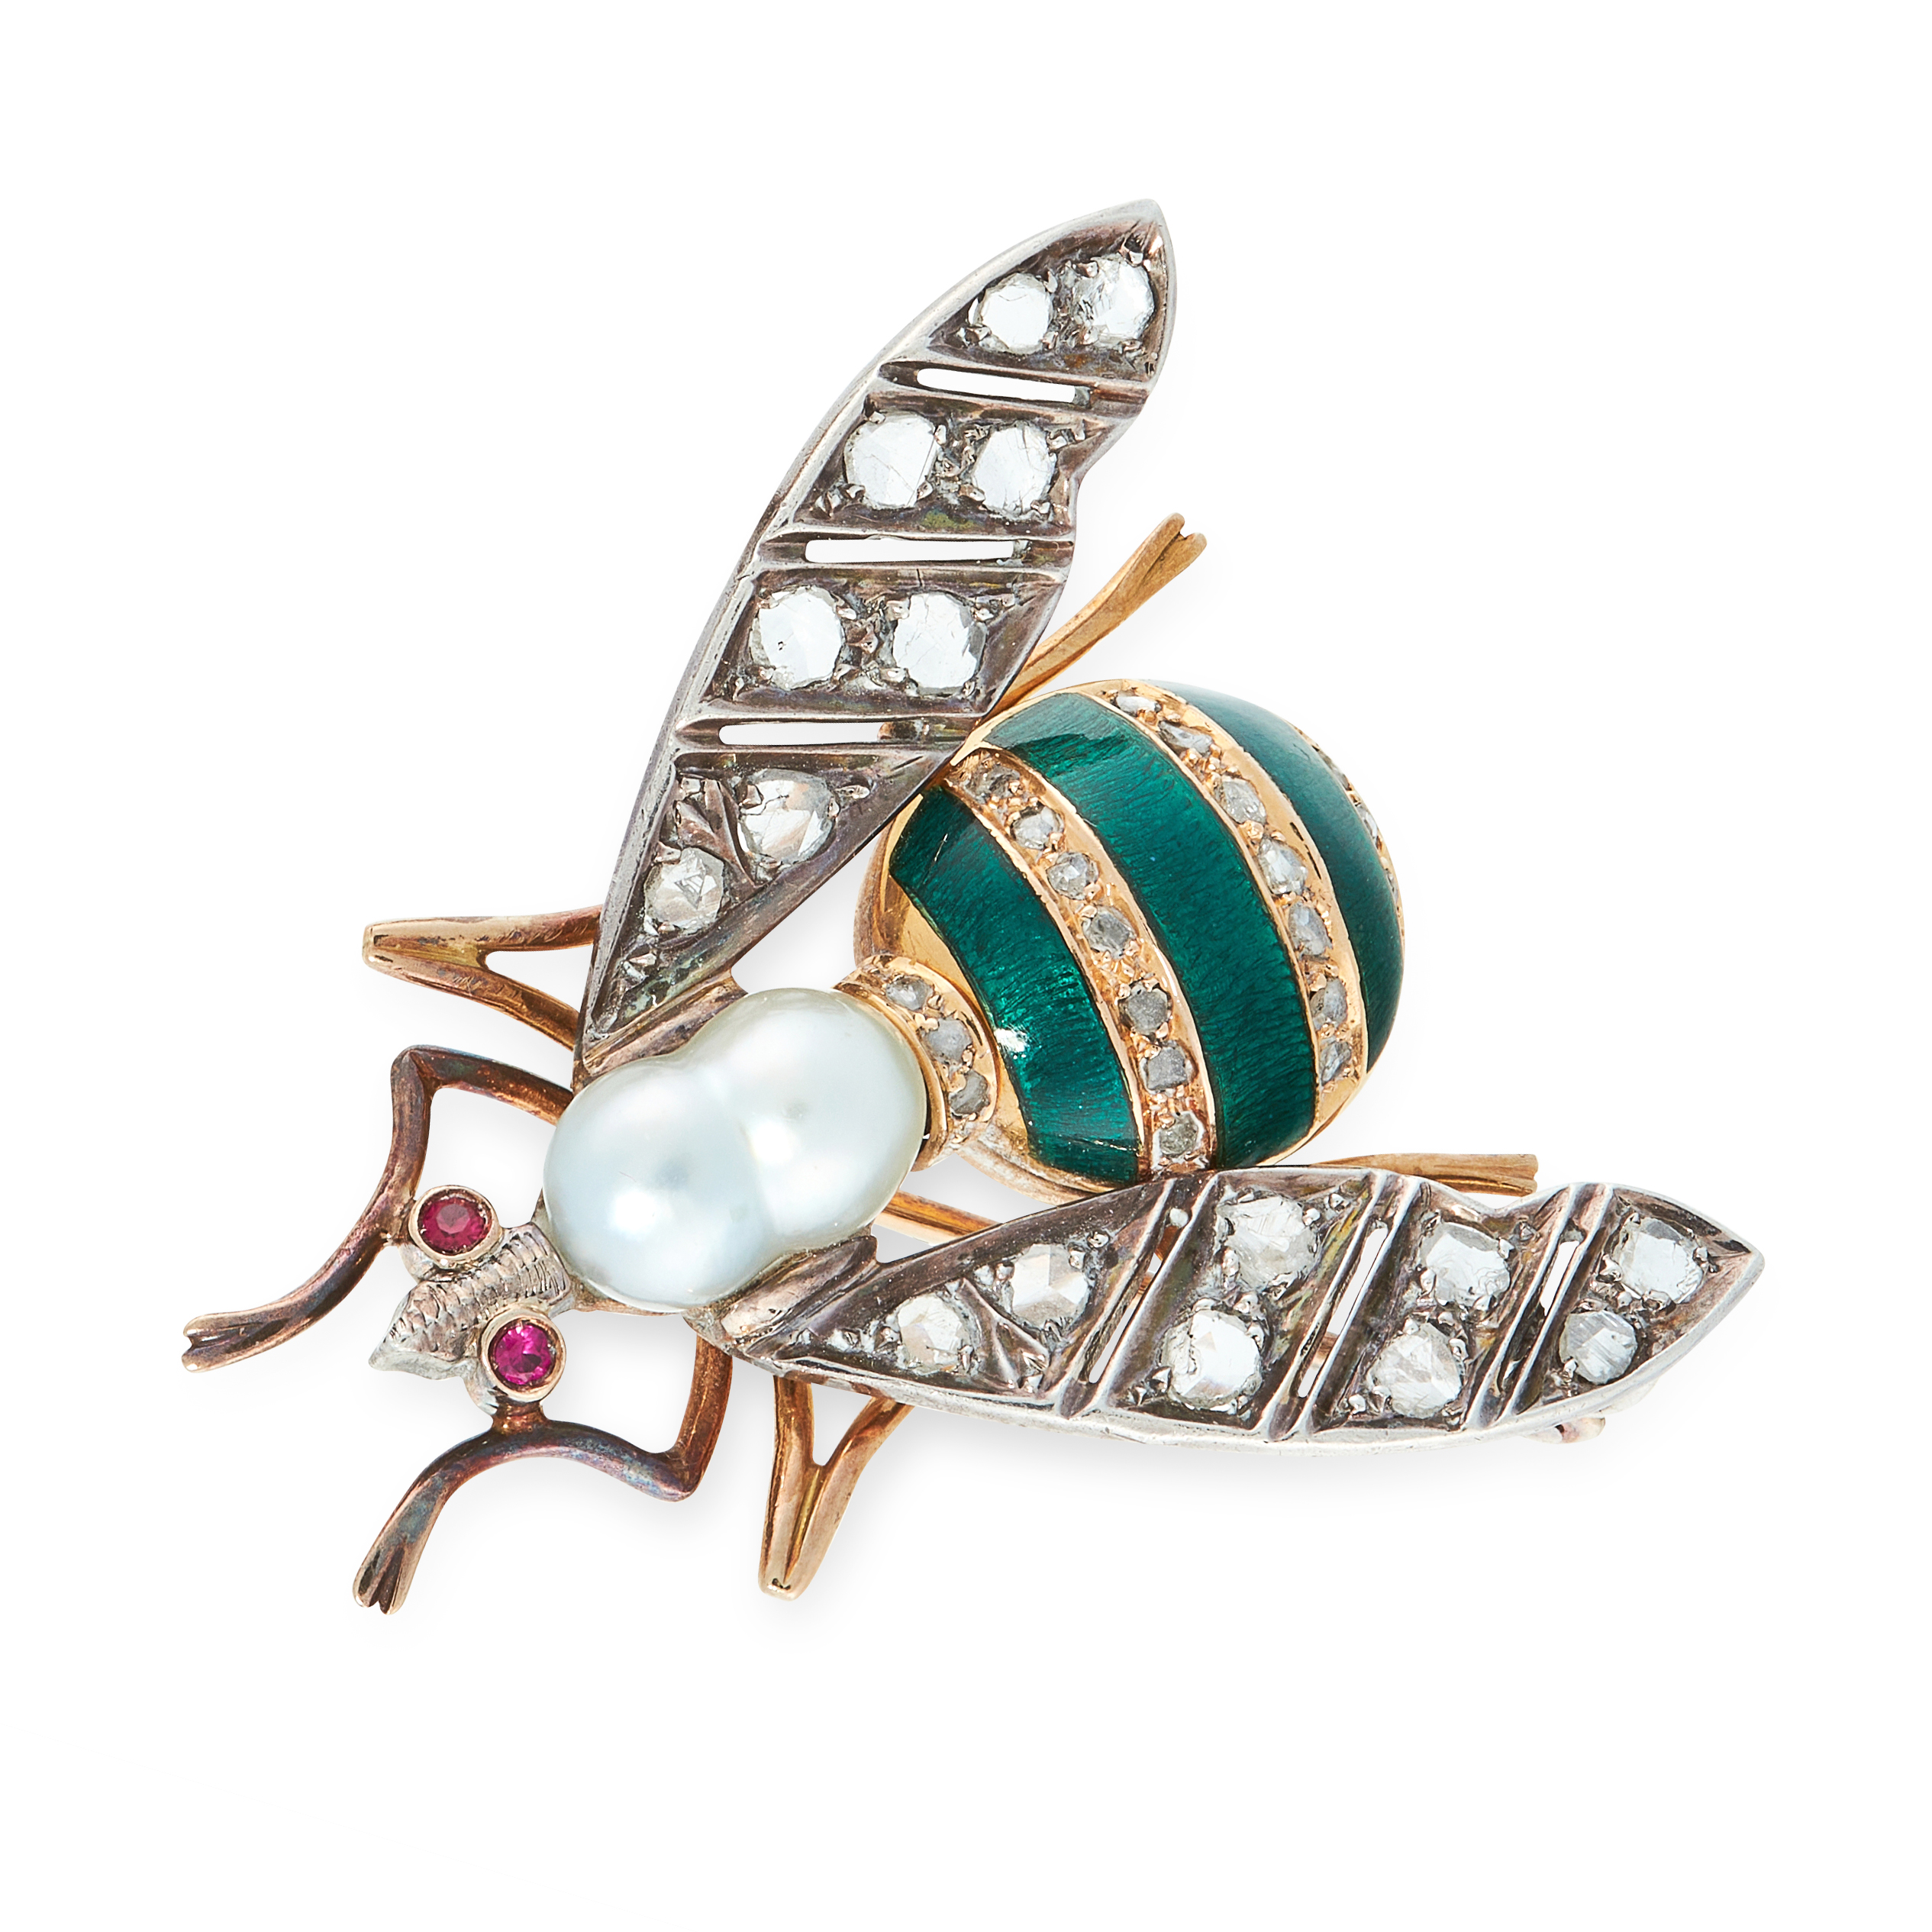 A PEARL, DIAMOND, RUBY AND ENAMEL INSECT BROOCH in yellow gold and silver, in the form of a bee, the